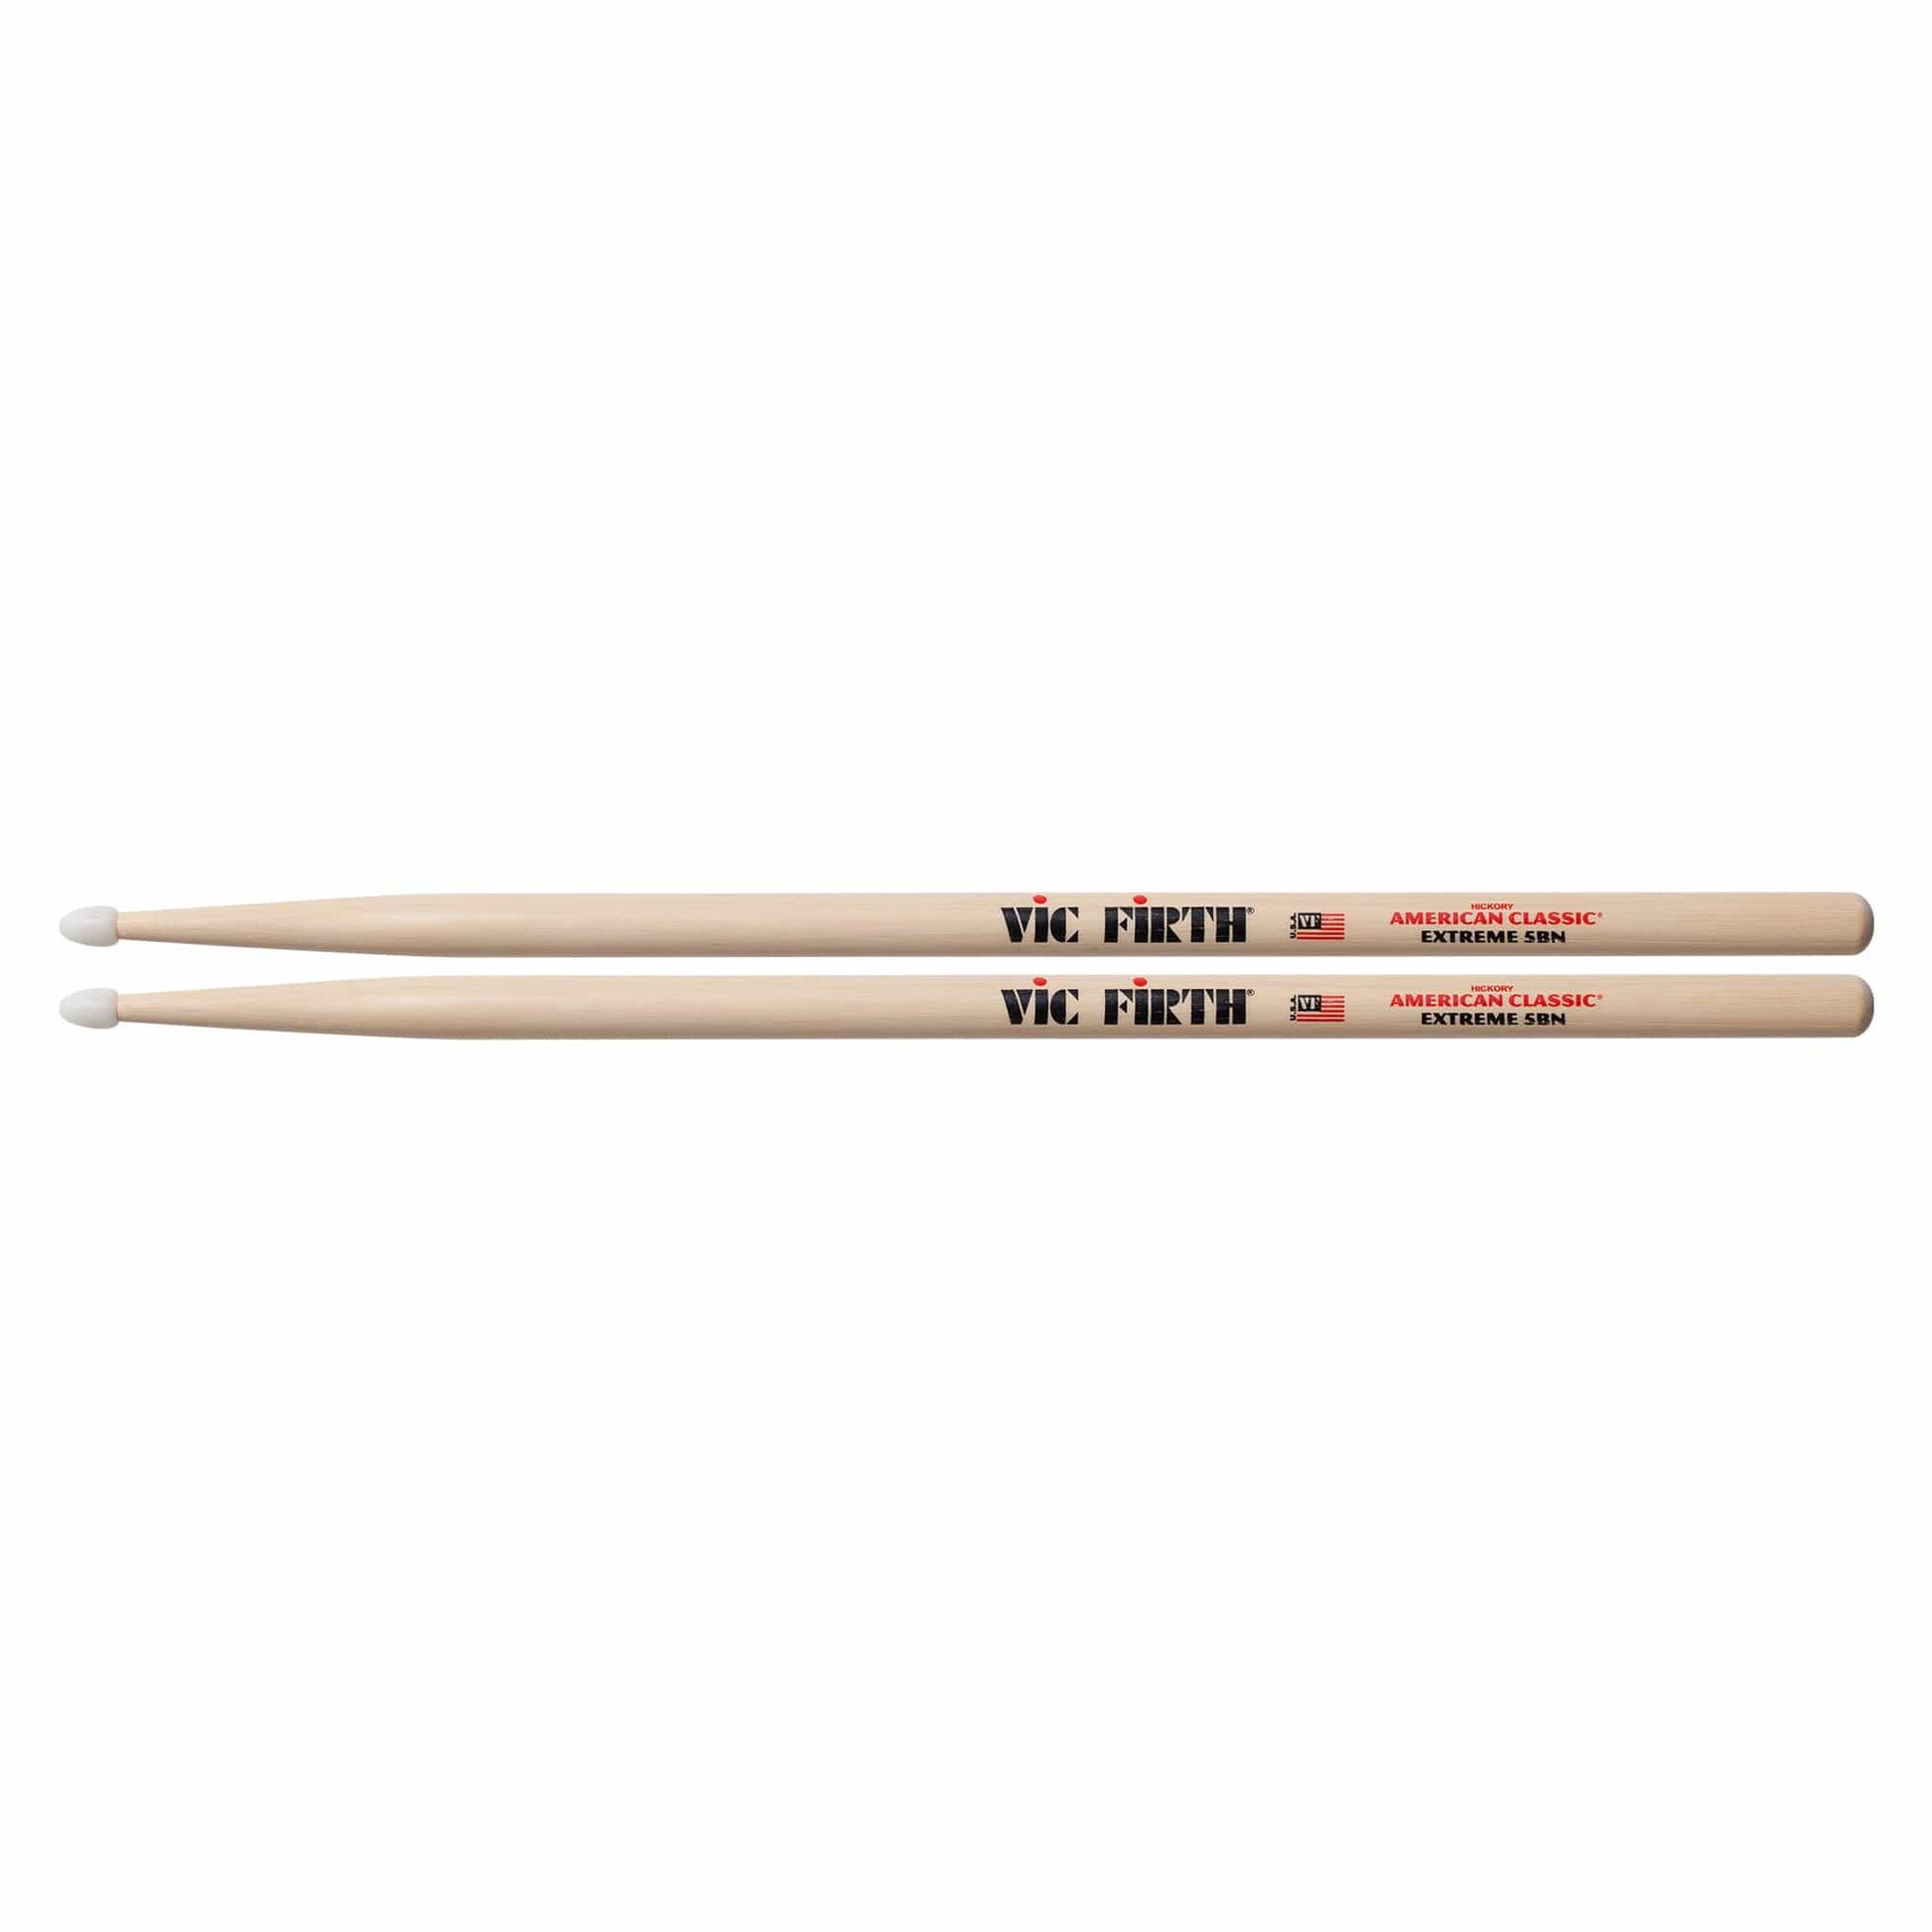 Vic Firth American Classic Extreme 5B Nylon Tip Drum Sticks Drums and Percussion / Parts and Accessories / Drum Sticks and Mallets